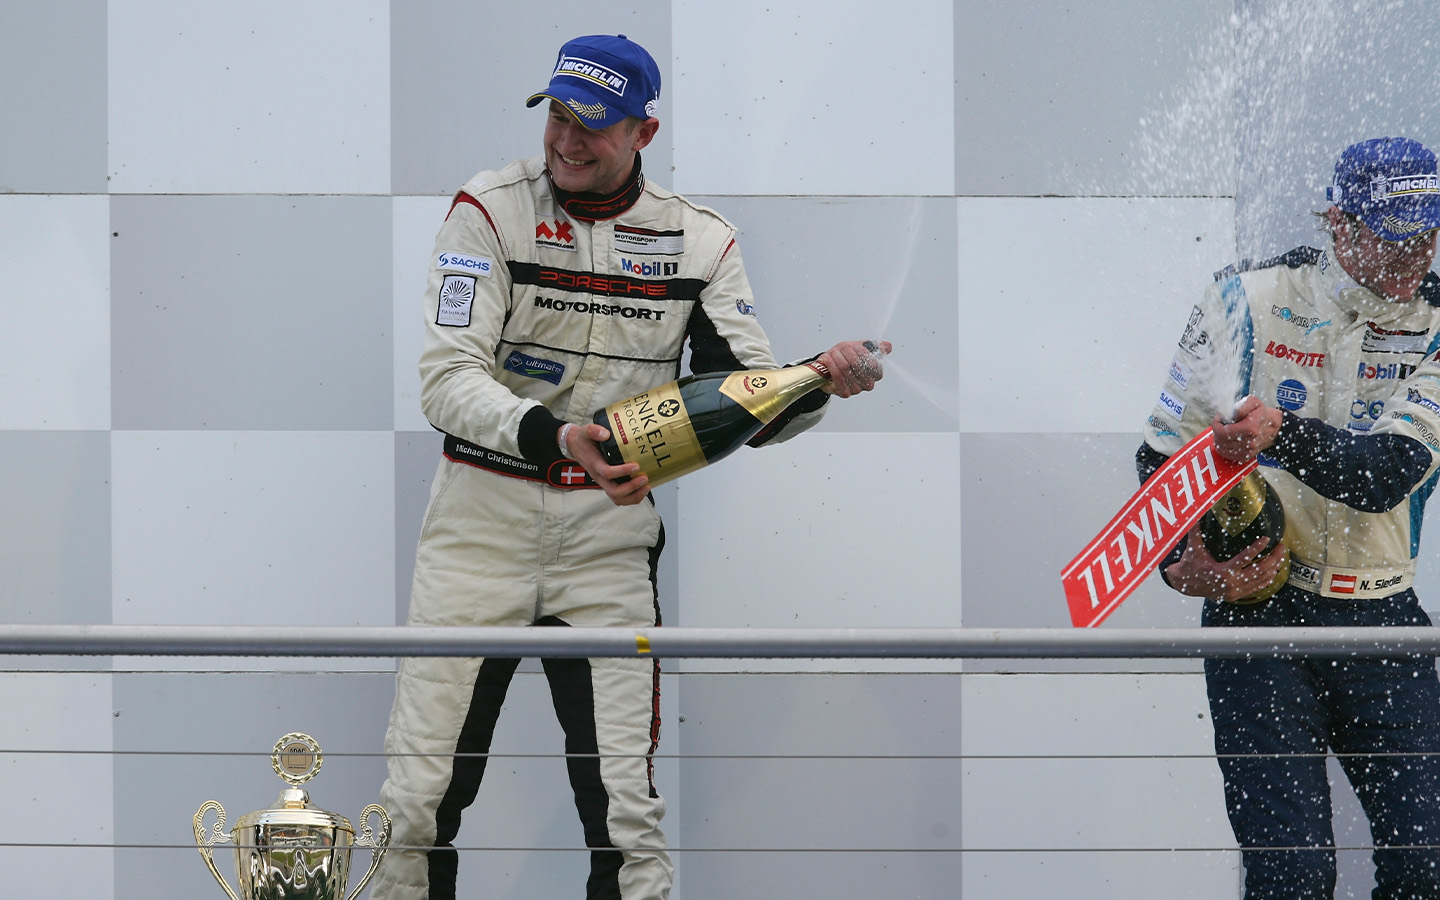 Racing driver Michael Christensen sprays champagne on podium after race